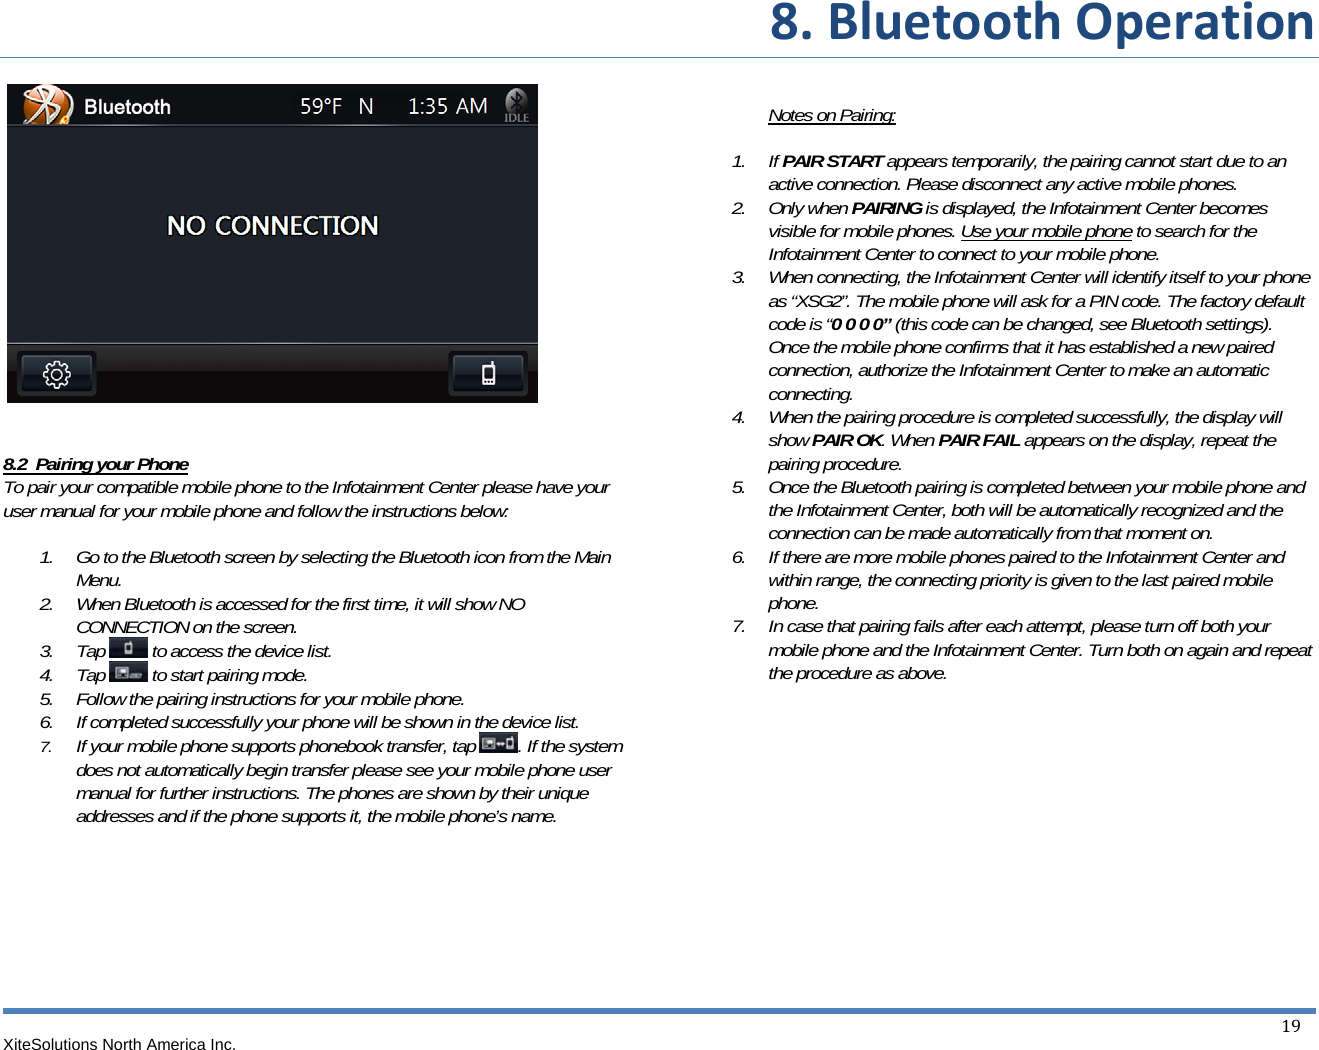 8.BluetoothOperationXiteSolutions North America Inc.  19         8.2  Pairing your Phone To pair your compatible mobile phone to the Infotainment Center please have your user manual for your mobile phone and follow the instructions below:  1. Go to the Bluetooth screen by selecting the Bluetooth icon from the Main Menu. 2. When Bluetooth is accessed for the first time, it will show NO CONNECTION on the screen. 3. Tap   to access the device list. 4. Tap   to start pairing mode. 5. Follow the pairing instructions for your mobile phone. 6. If completed successfully your phone will be shown in the device list. 7. If your mobile phone supports phonebook transfer, tap  . If the system does not automatically begin transfer please see your mobile phone user manual for further instructions. The phones are shown by their unique addresses and if the phone supports it, the mobile phone’s name.          Notes on Pairing:   1. If PAIR START appears temporarily, the pairing cannot start due to an active connection. Please disconnect any active mobile phones. 2. Only when PAIRING is displayed, the Infotainment Center becomes visible for mobile phones. Use your mobile phone to search for the Infotainment Center to connect to your mobile phone. 3. When connecting, the Infotainment Center will identify itself to your phone as “XSG2”. The mobile phone will ask for a PIN code. The factory default code is “0 0 0 0” (this code can be changed, see Bluetooth settings). Once the mobile phone confirms that it has established a new paired connection, authorize the Infotainment Center to make an automatic connecting. 4. When the pairing procedure is completed successfully, the display will show PAIR OK. When PAIR FAIL appears on the display, repeat the pairing procedure. 5. Once the Bluetooth pairing is completed between your mobile phone and the Infotainment Center, both will be automatically recognized and the connection can be made automatically from that moment on. 6. If there are more mobile phones paired to the Infotainment Center and within range, the connecting priority is given to the last paired mobile phone. 7. In case that pairing fails after each attempt, please turn off both your mobile phone and the Infotainment Center. Turn both on again and repeat the procedure as above.            